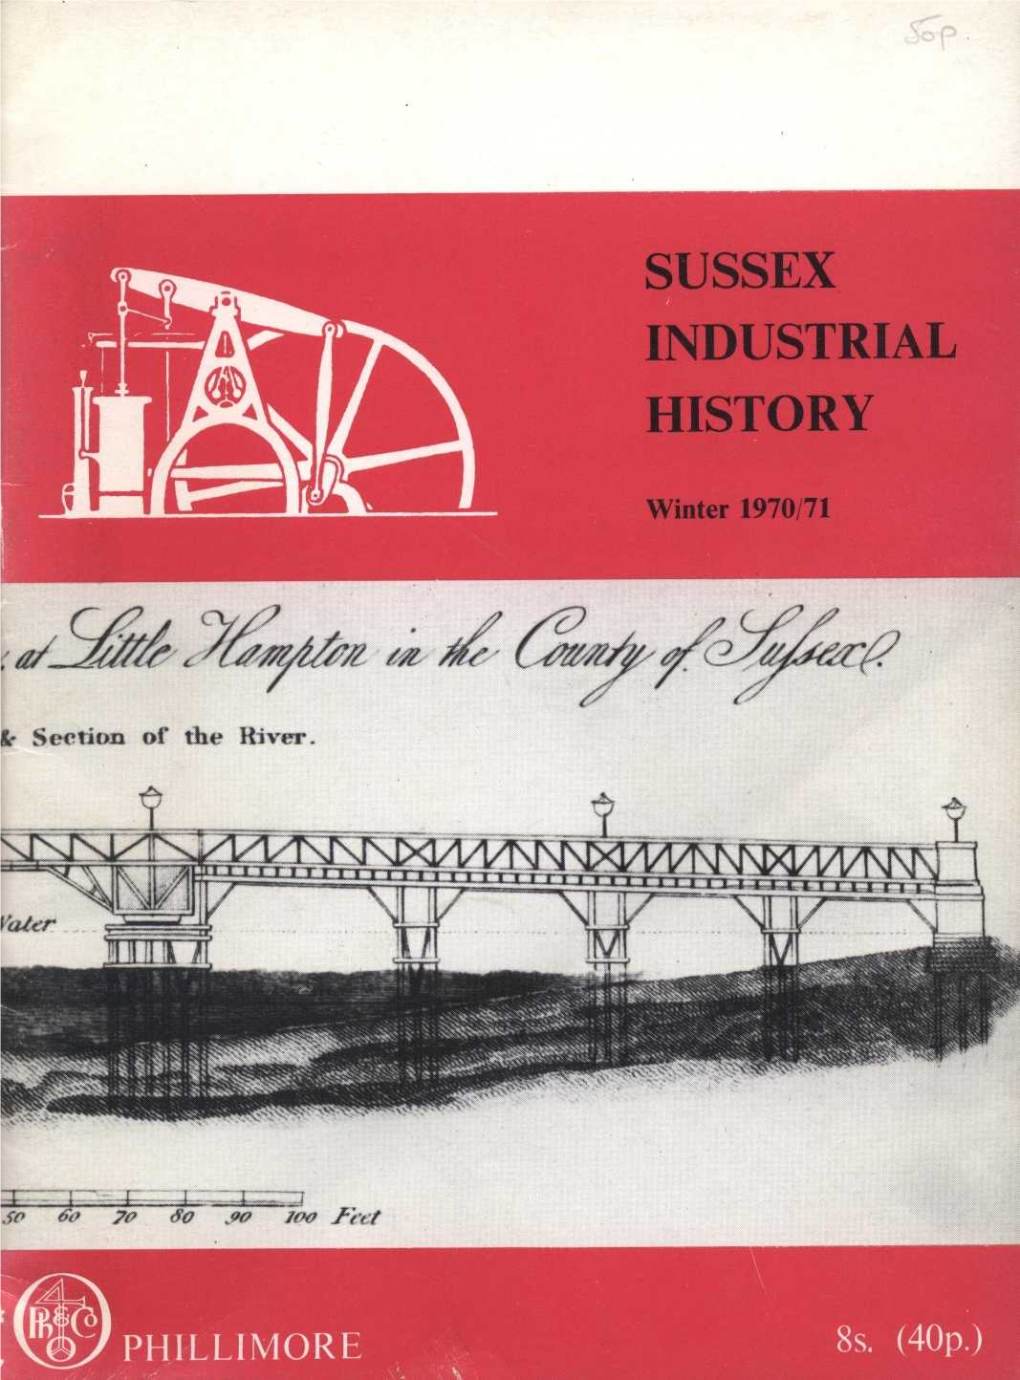 Sussex Industrial History